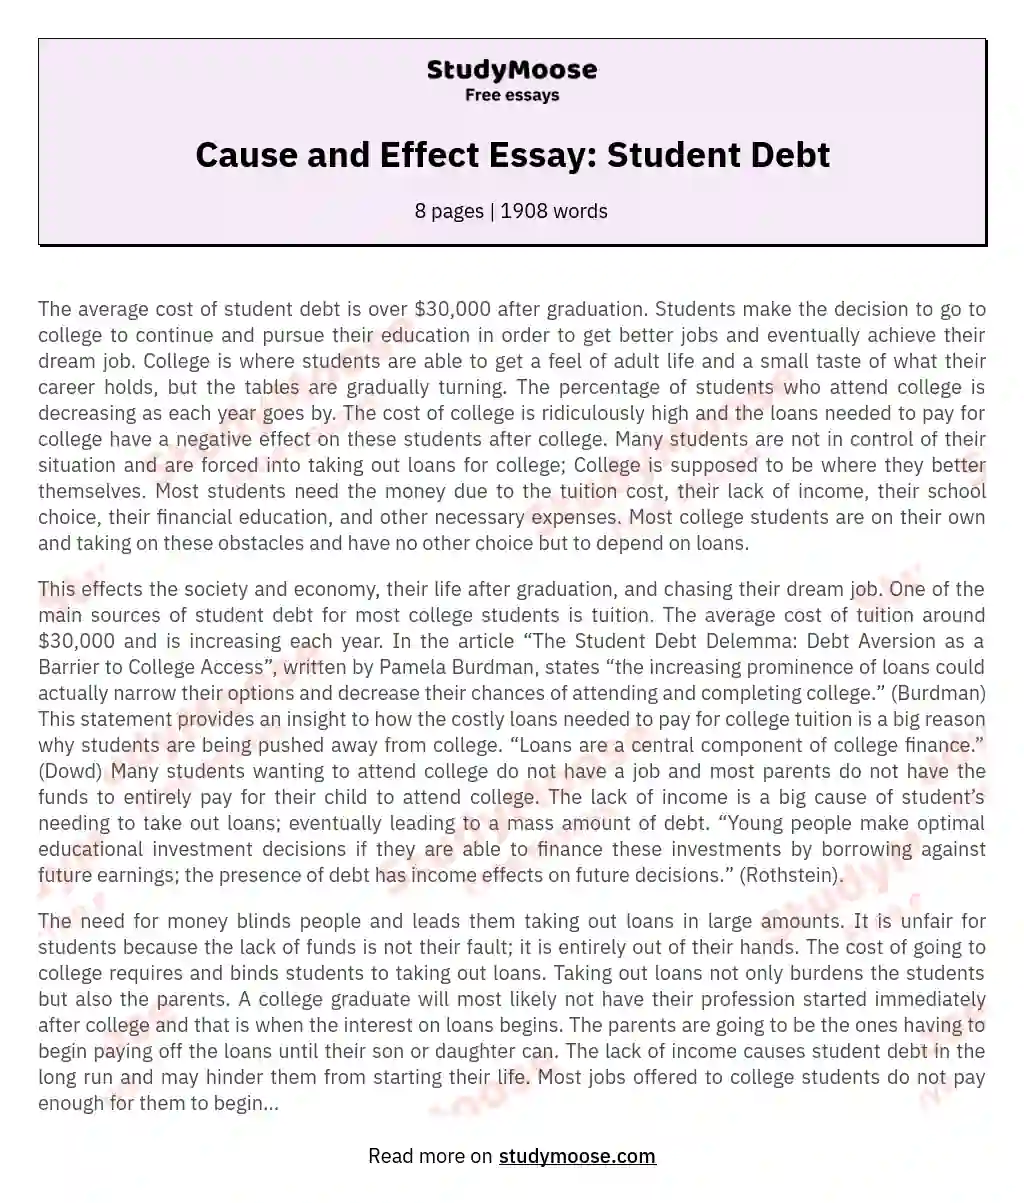 Cause and Effect Essay: Student Debt essay